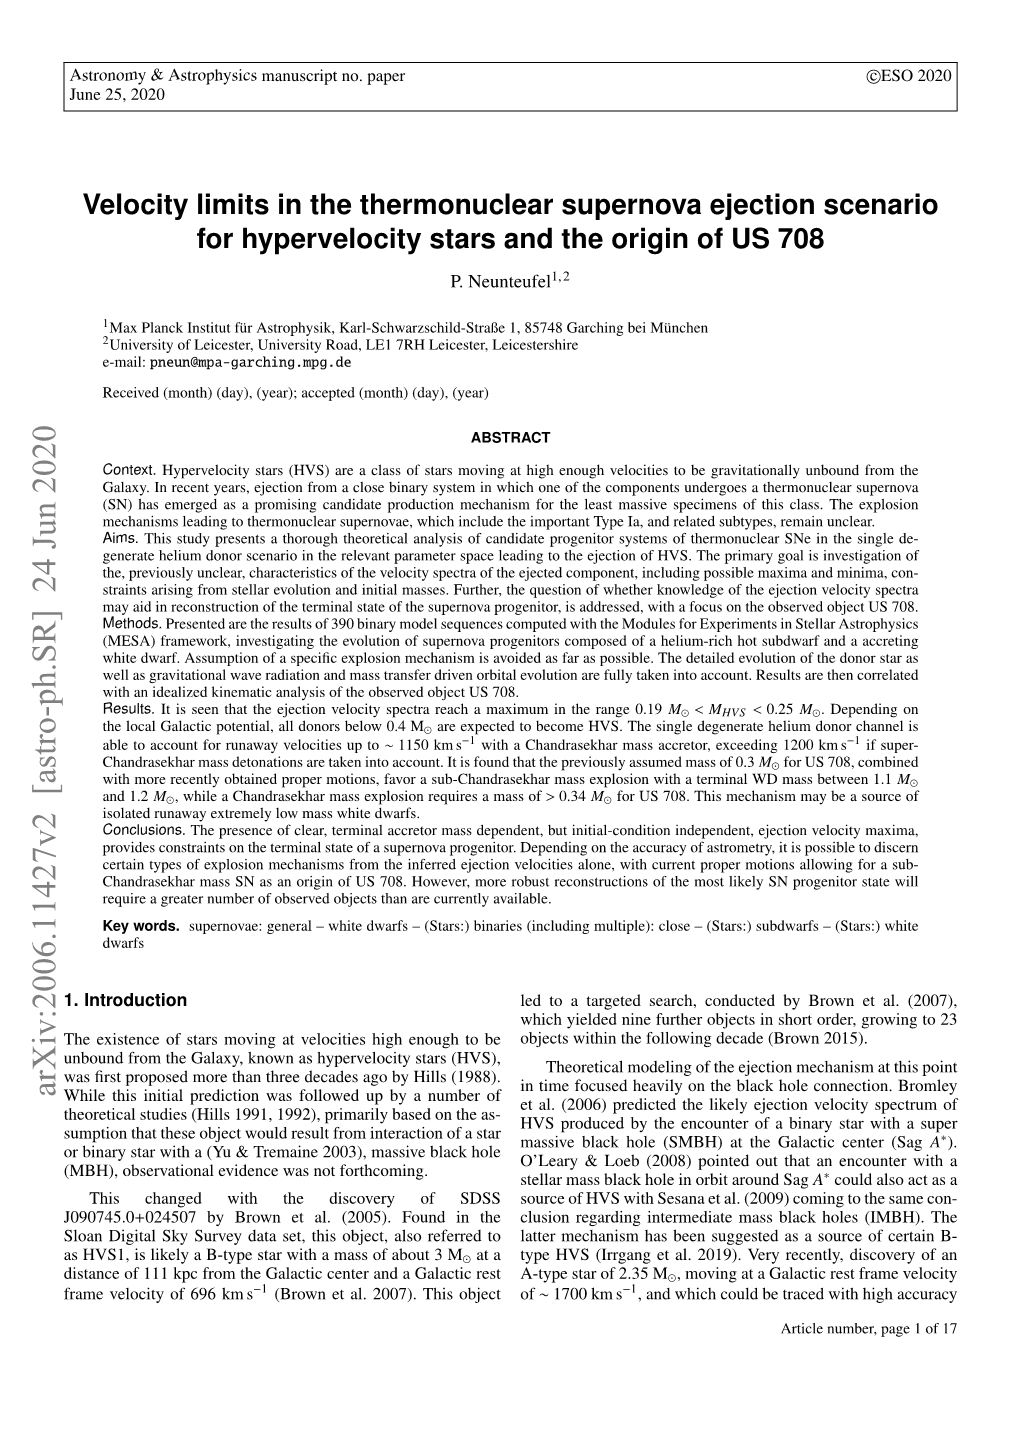 Velocity Limits in the Thermonuclear Supernova Ejection Scenario for Hypervelocity Stars and the Origin of US 708 P